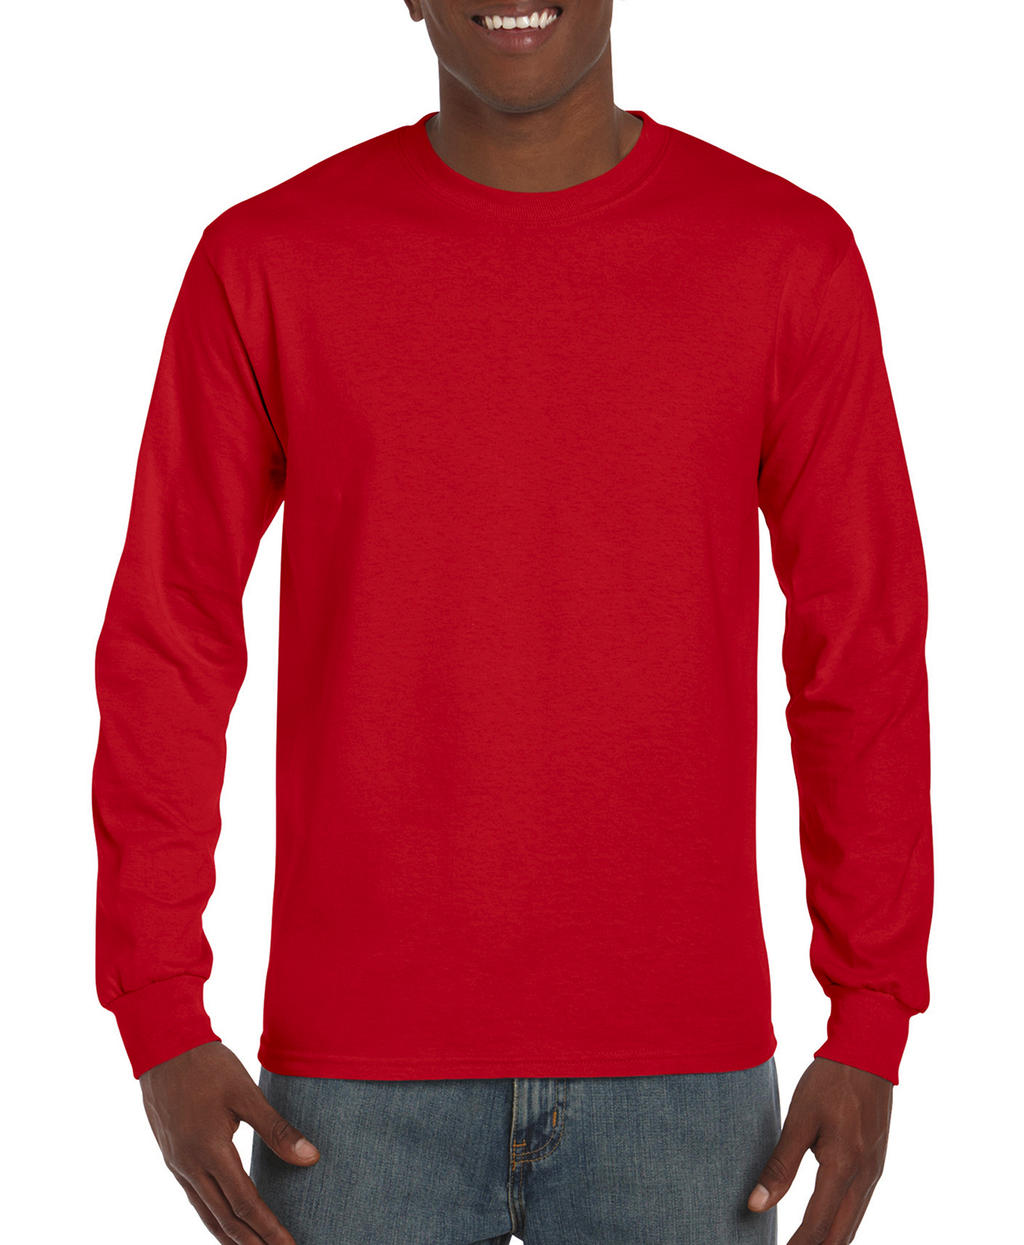  Hammer? Adult Long Sleeve T-Shirt in Farbe Sport Scarlet Red